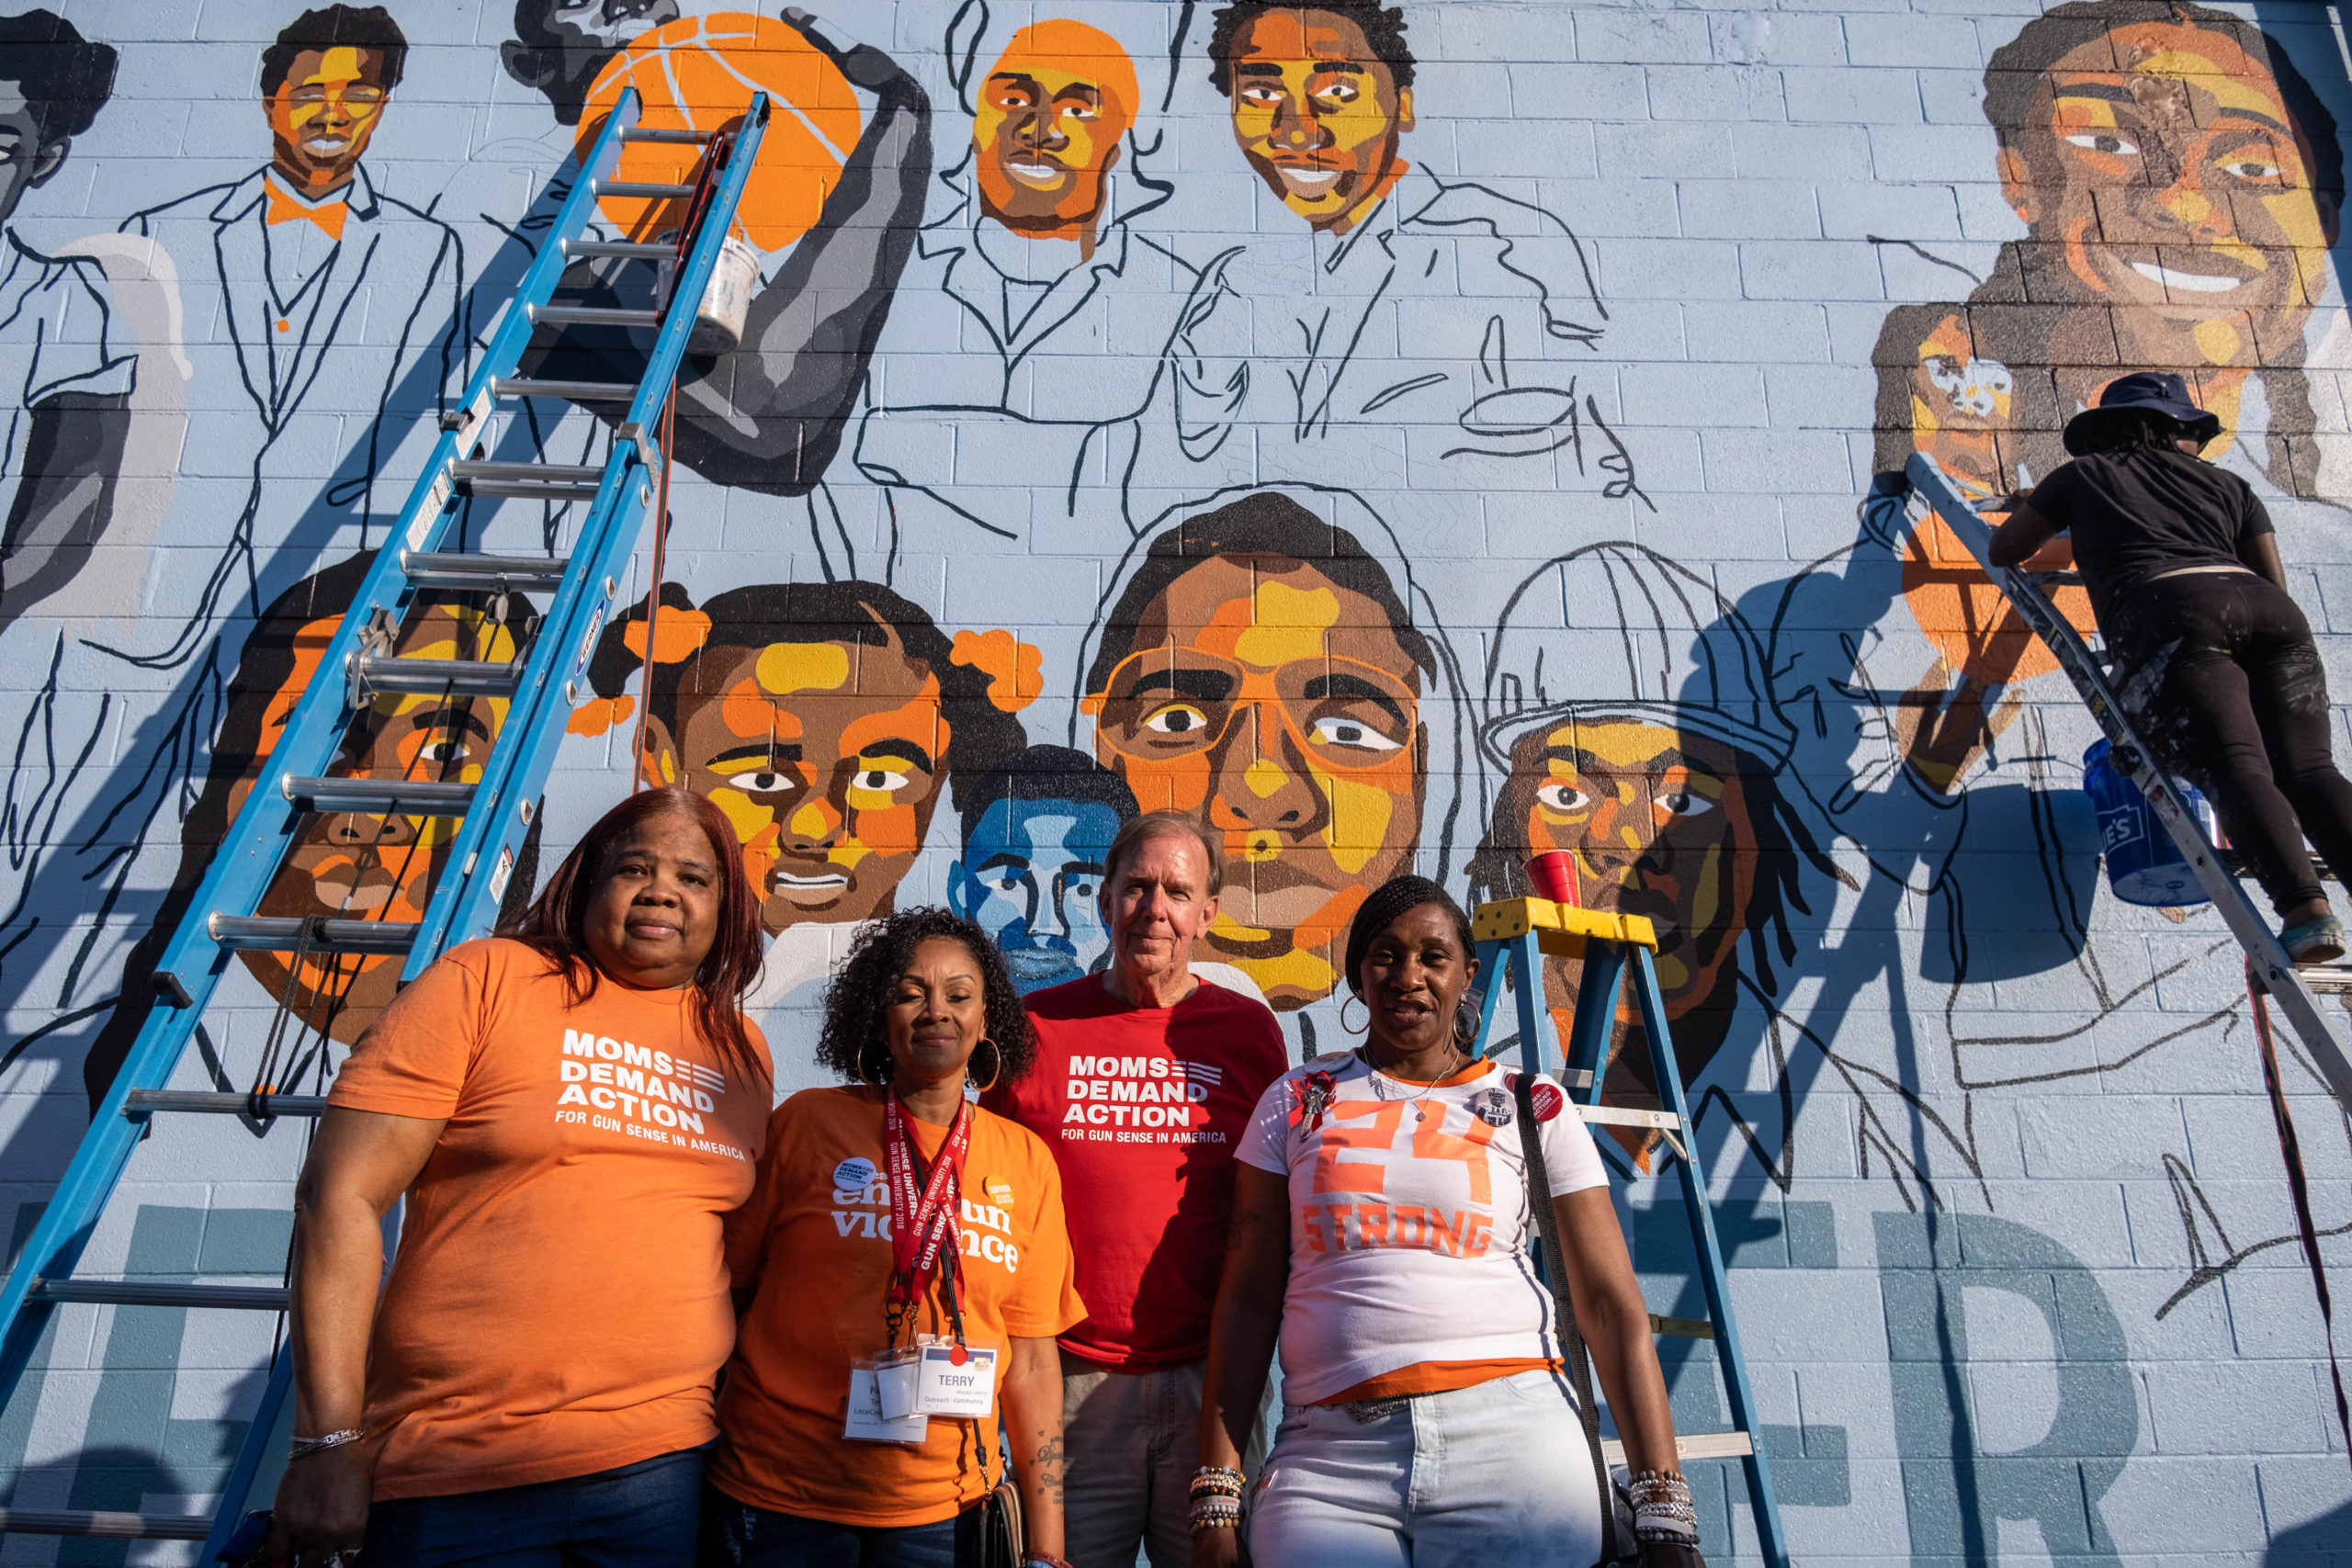 People in Wear Orange and Moms Demand Action t-shirts pose in front of a mural